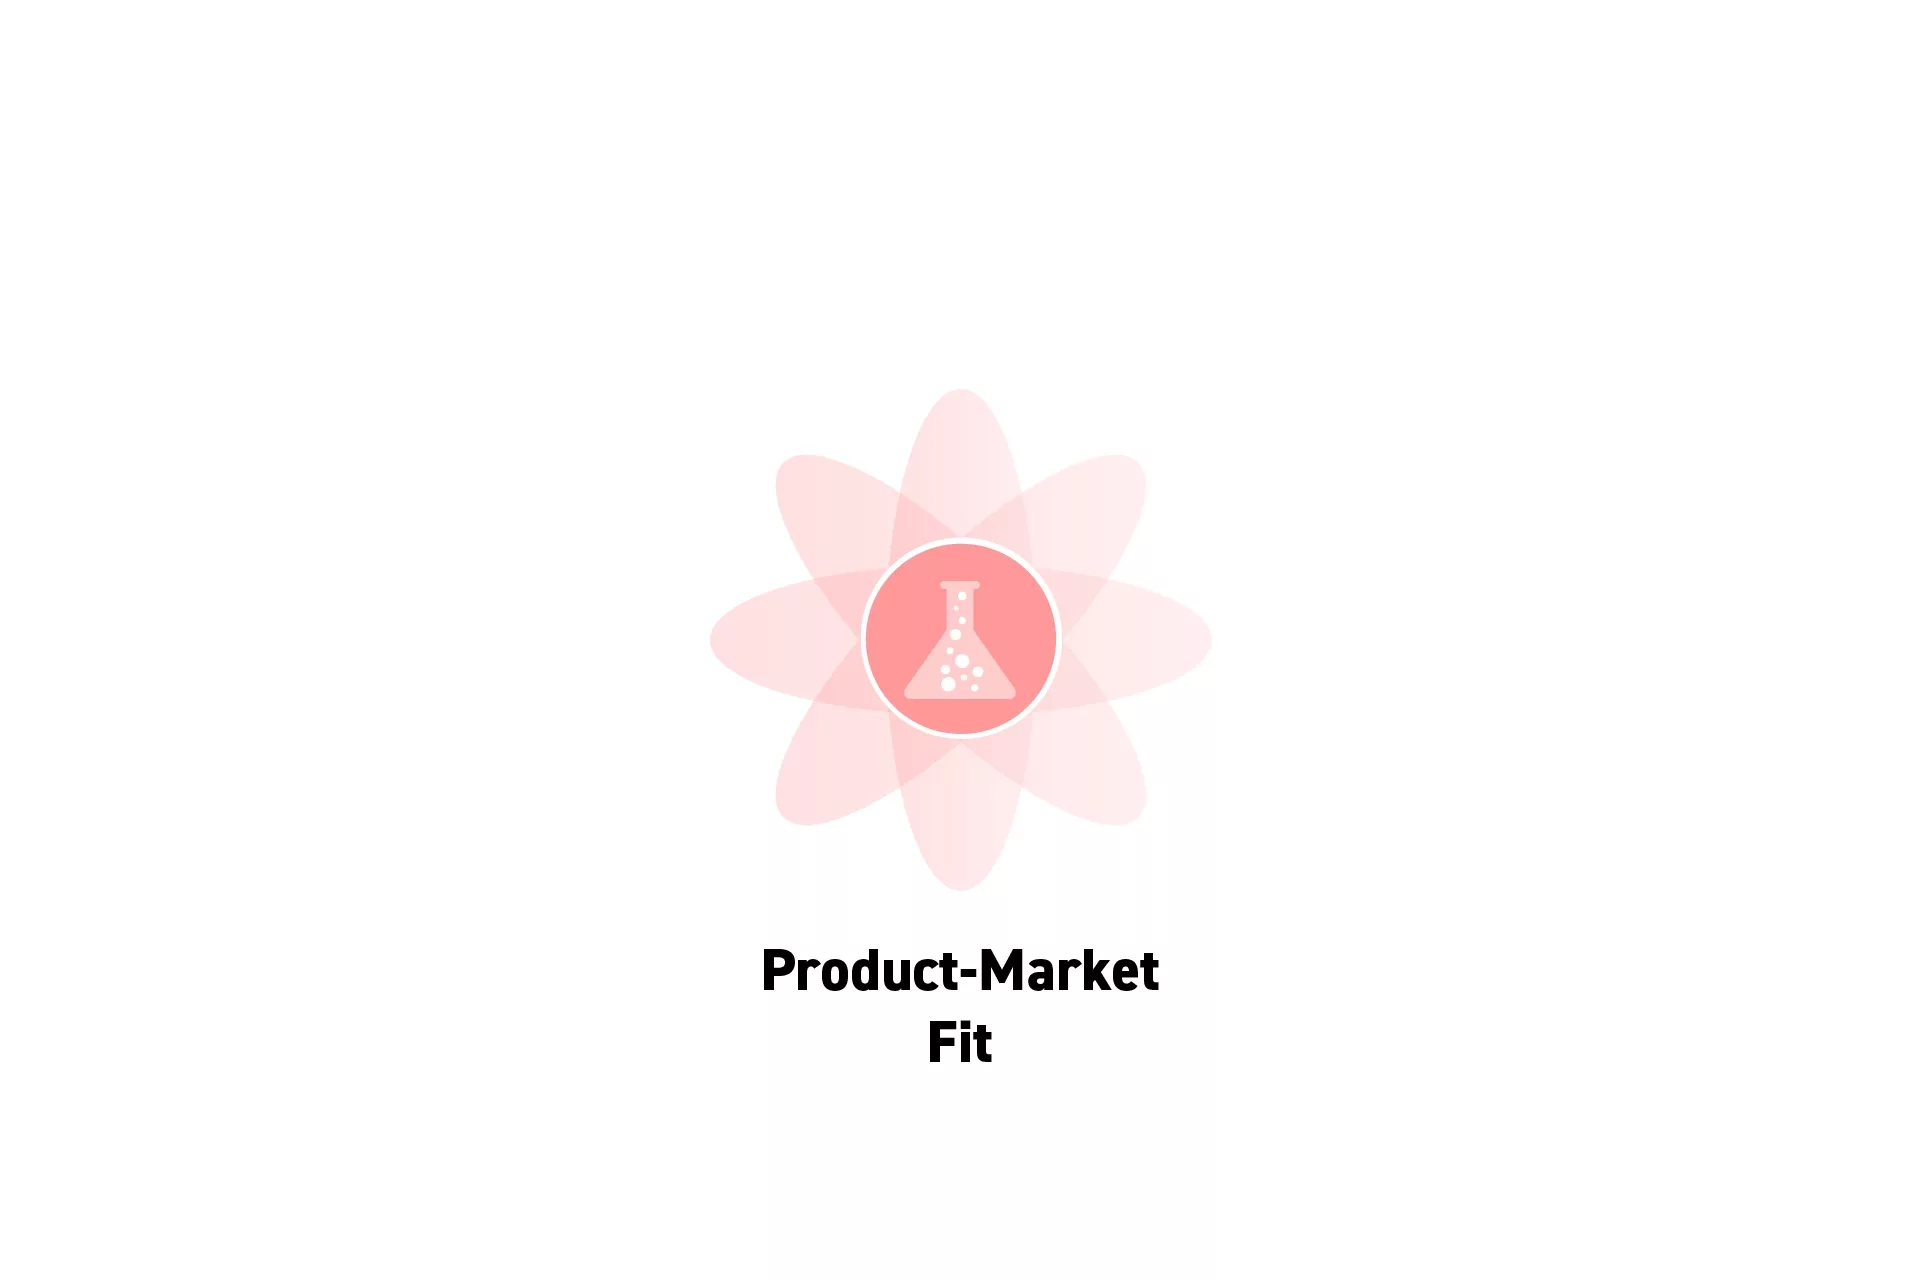 A flower that represents Strategy with the text “Product-Market Fit” beneath it.